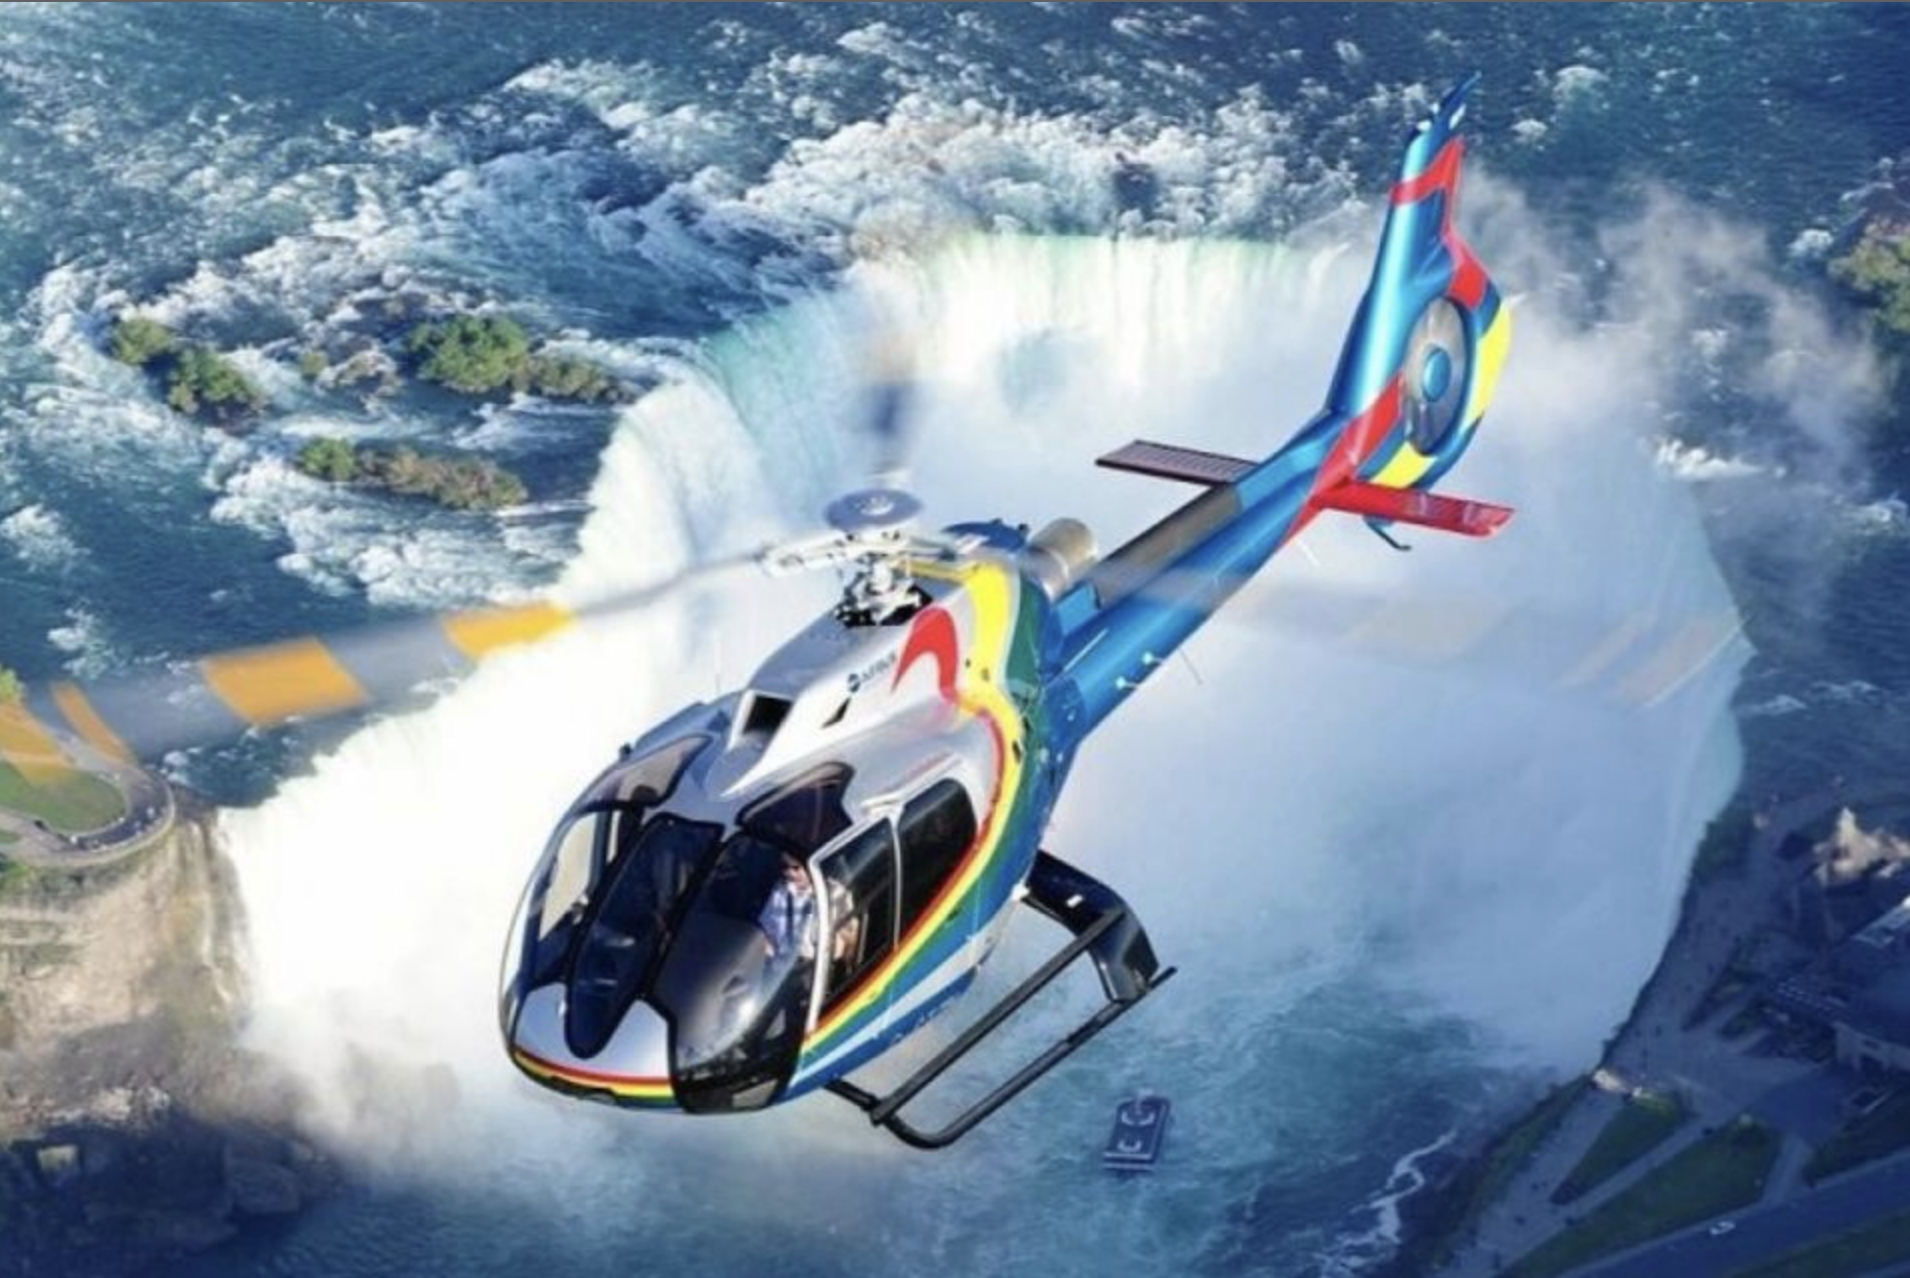 8. Niagara Falls Private Half Day Tour with Boat and Helicopter